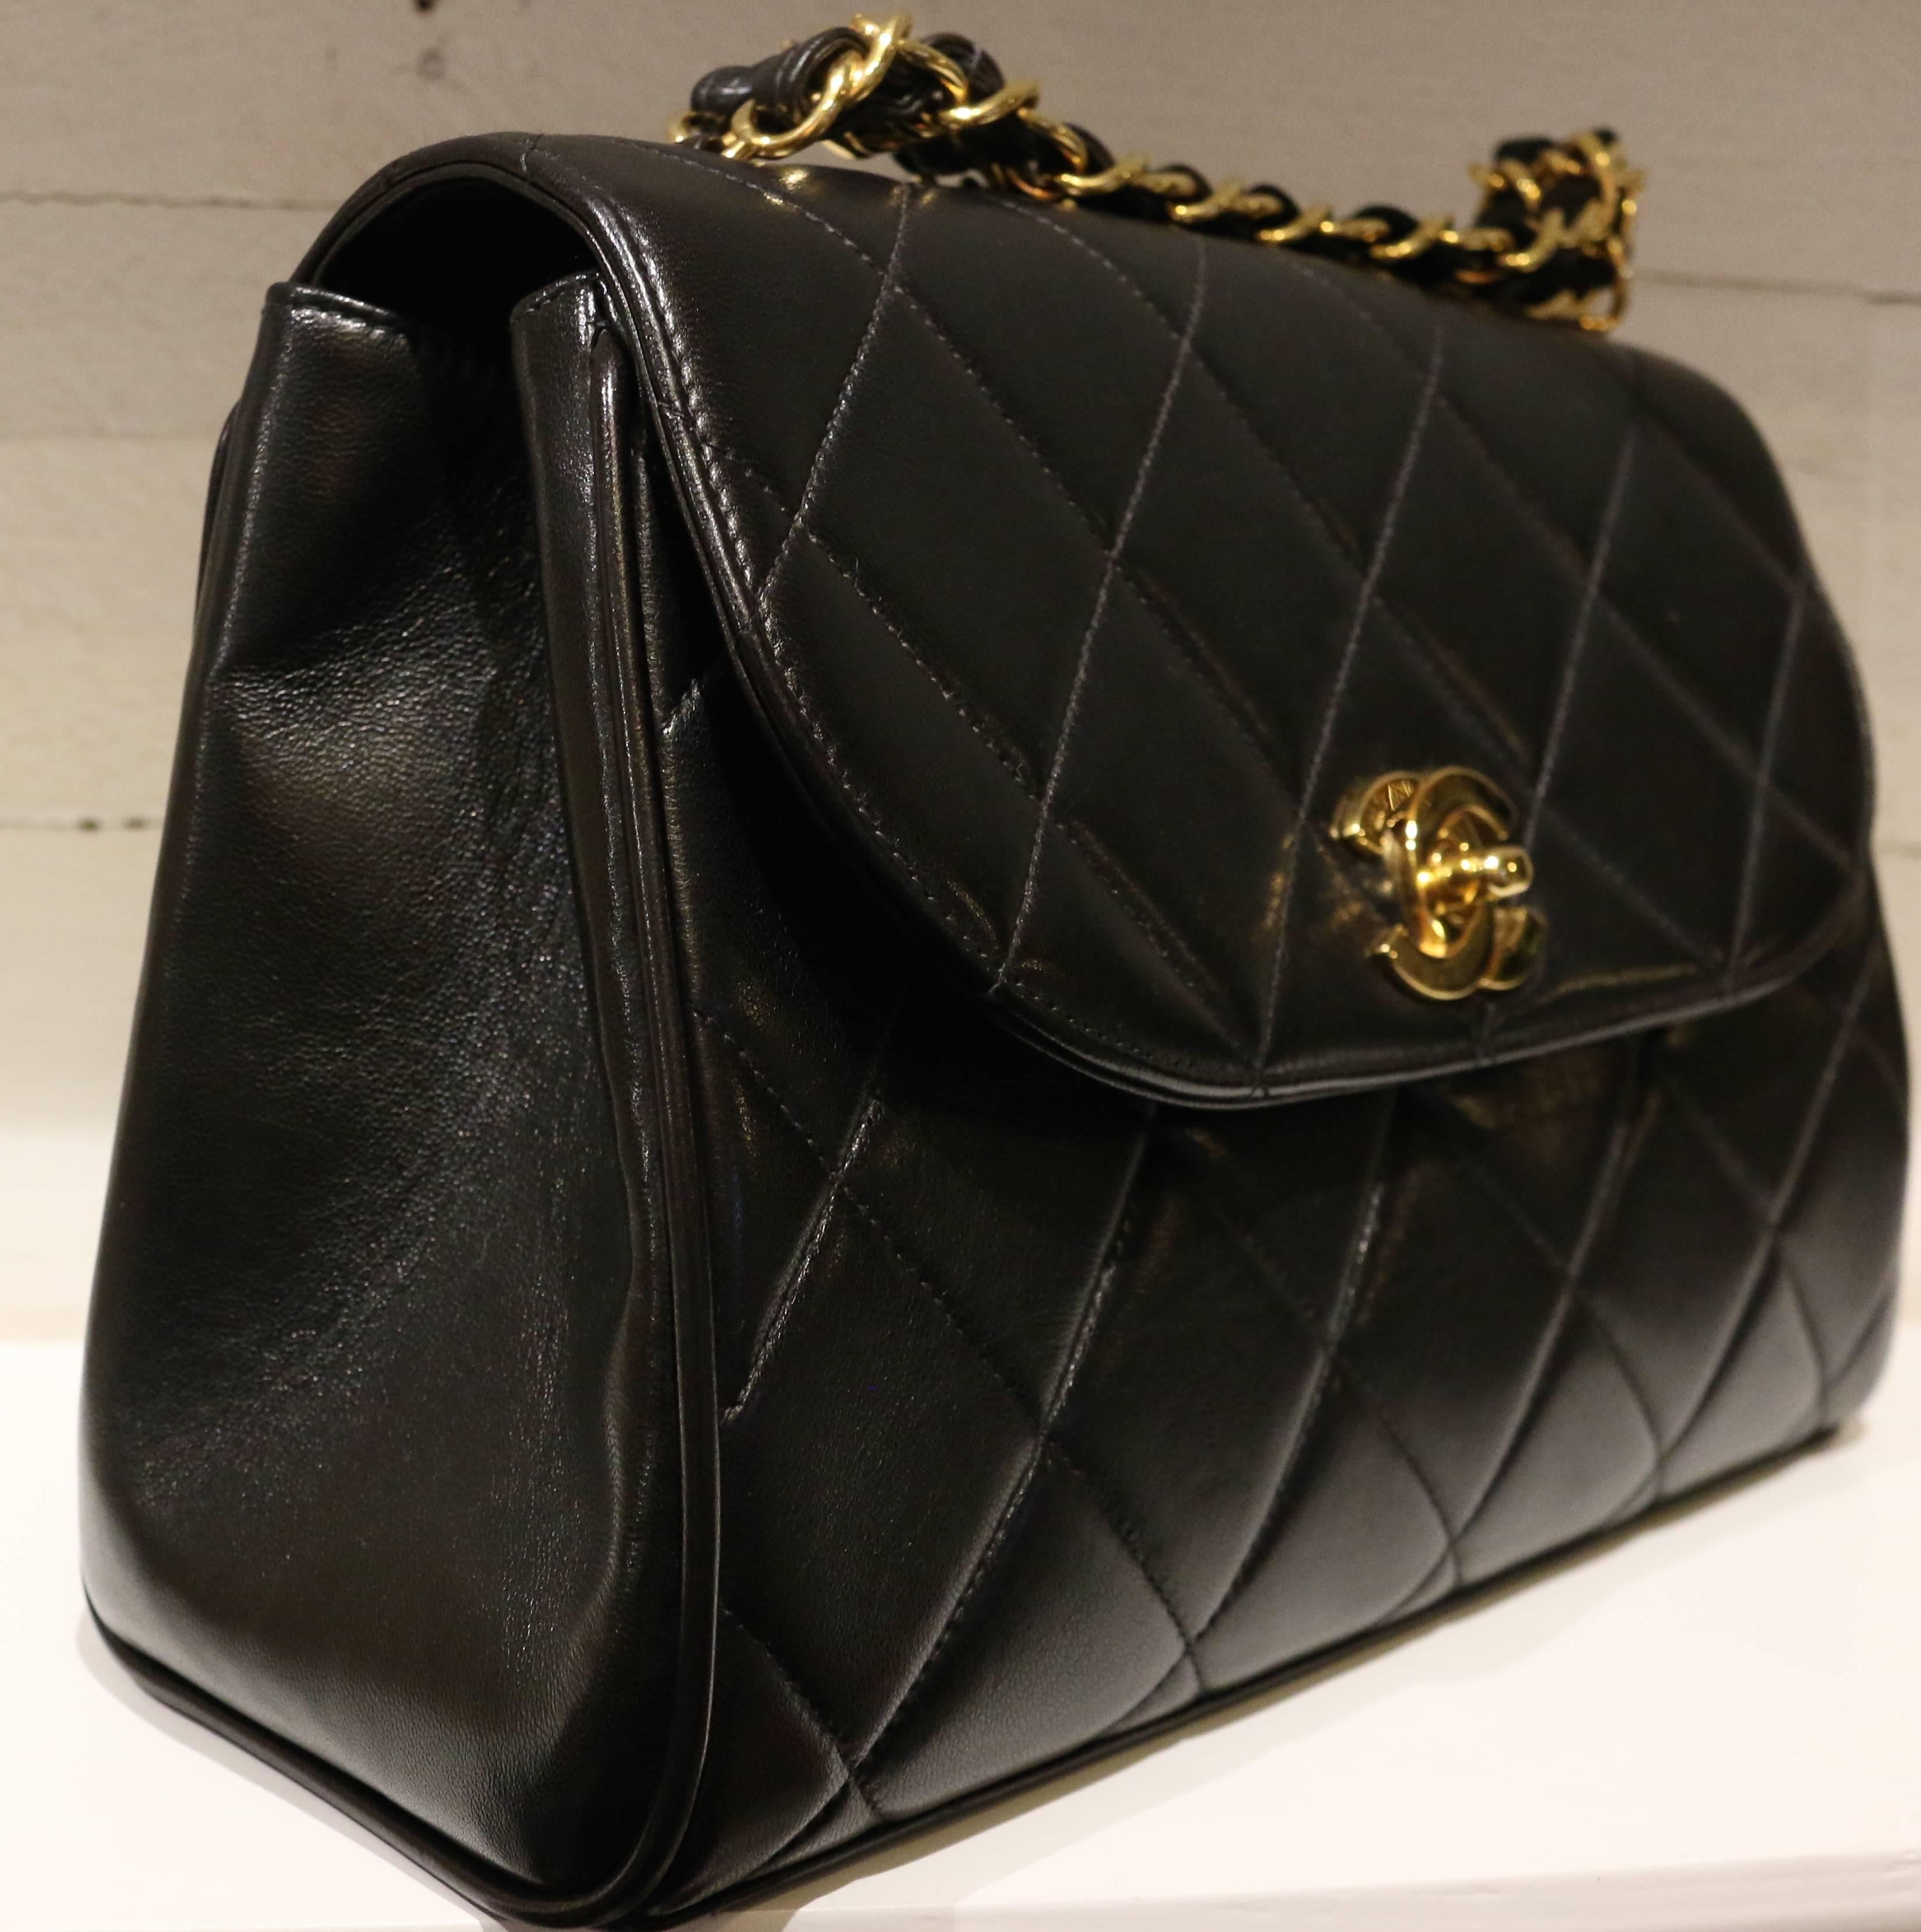 - Vintage 90s Chanel black quilted lambskin trapezoid gold chain leather handle handbag. Featuring a gold hardware 'CC